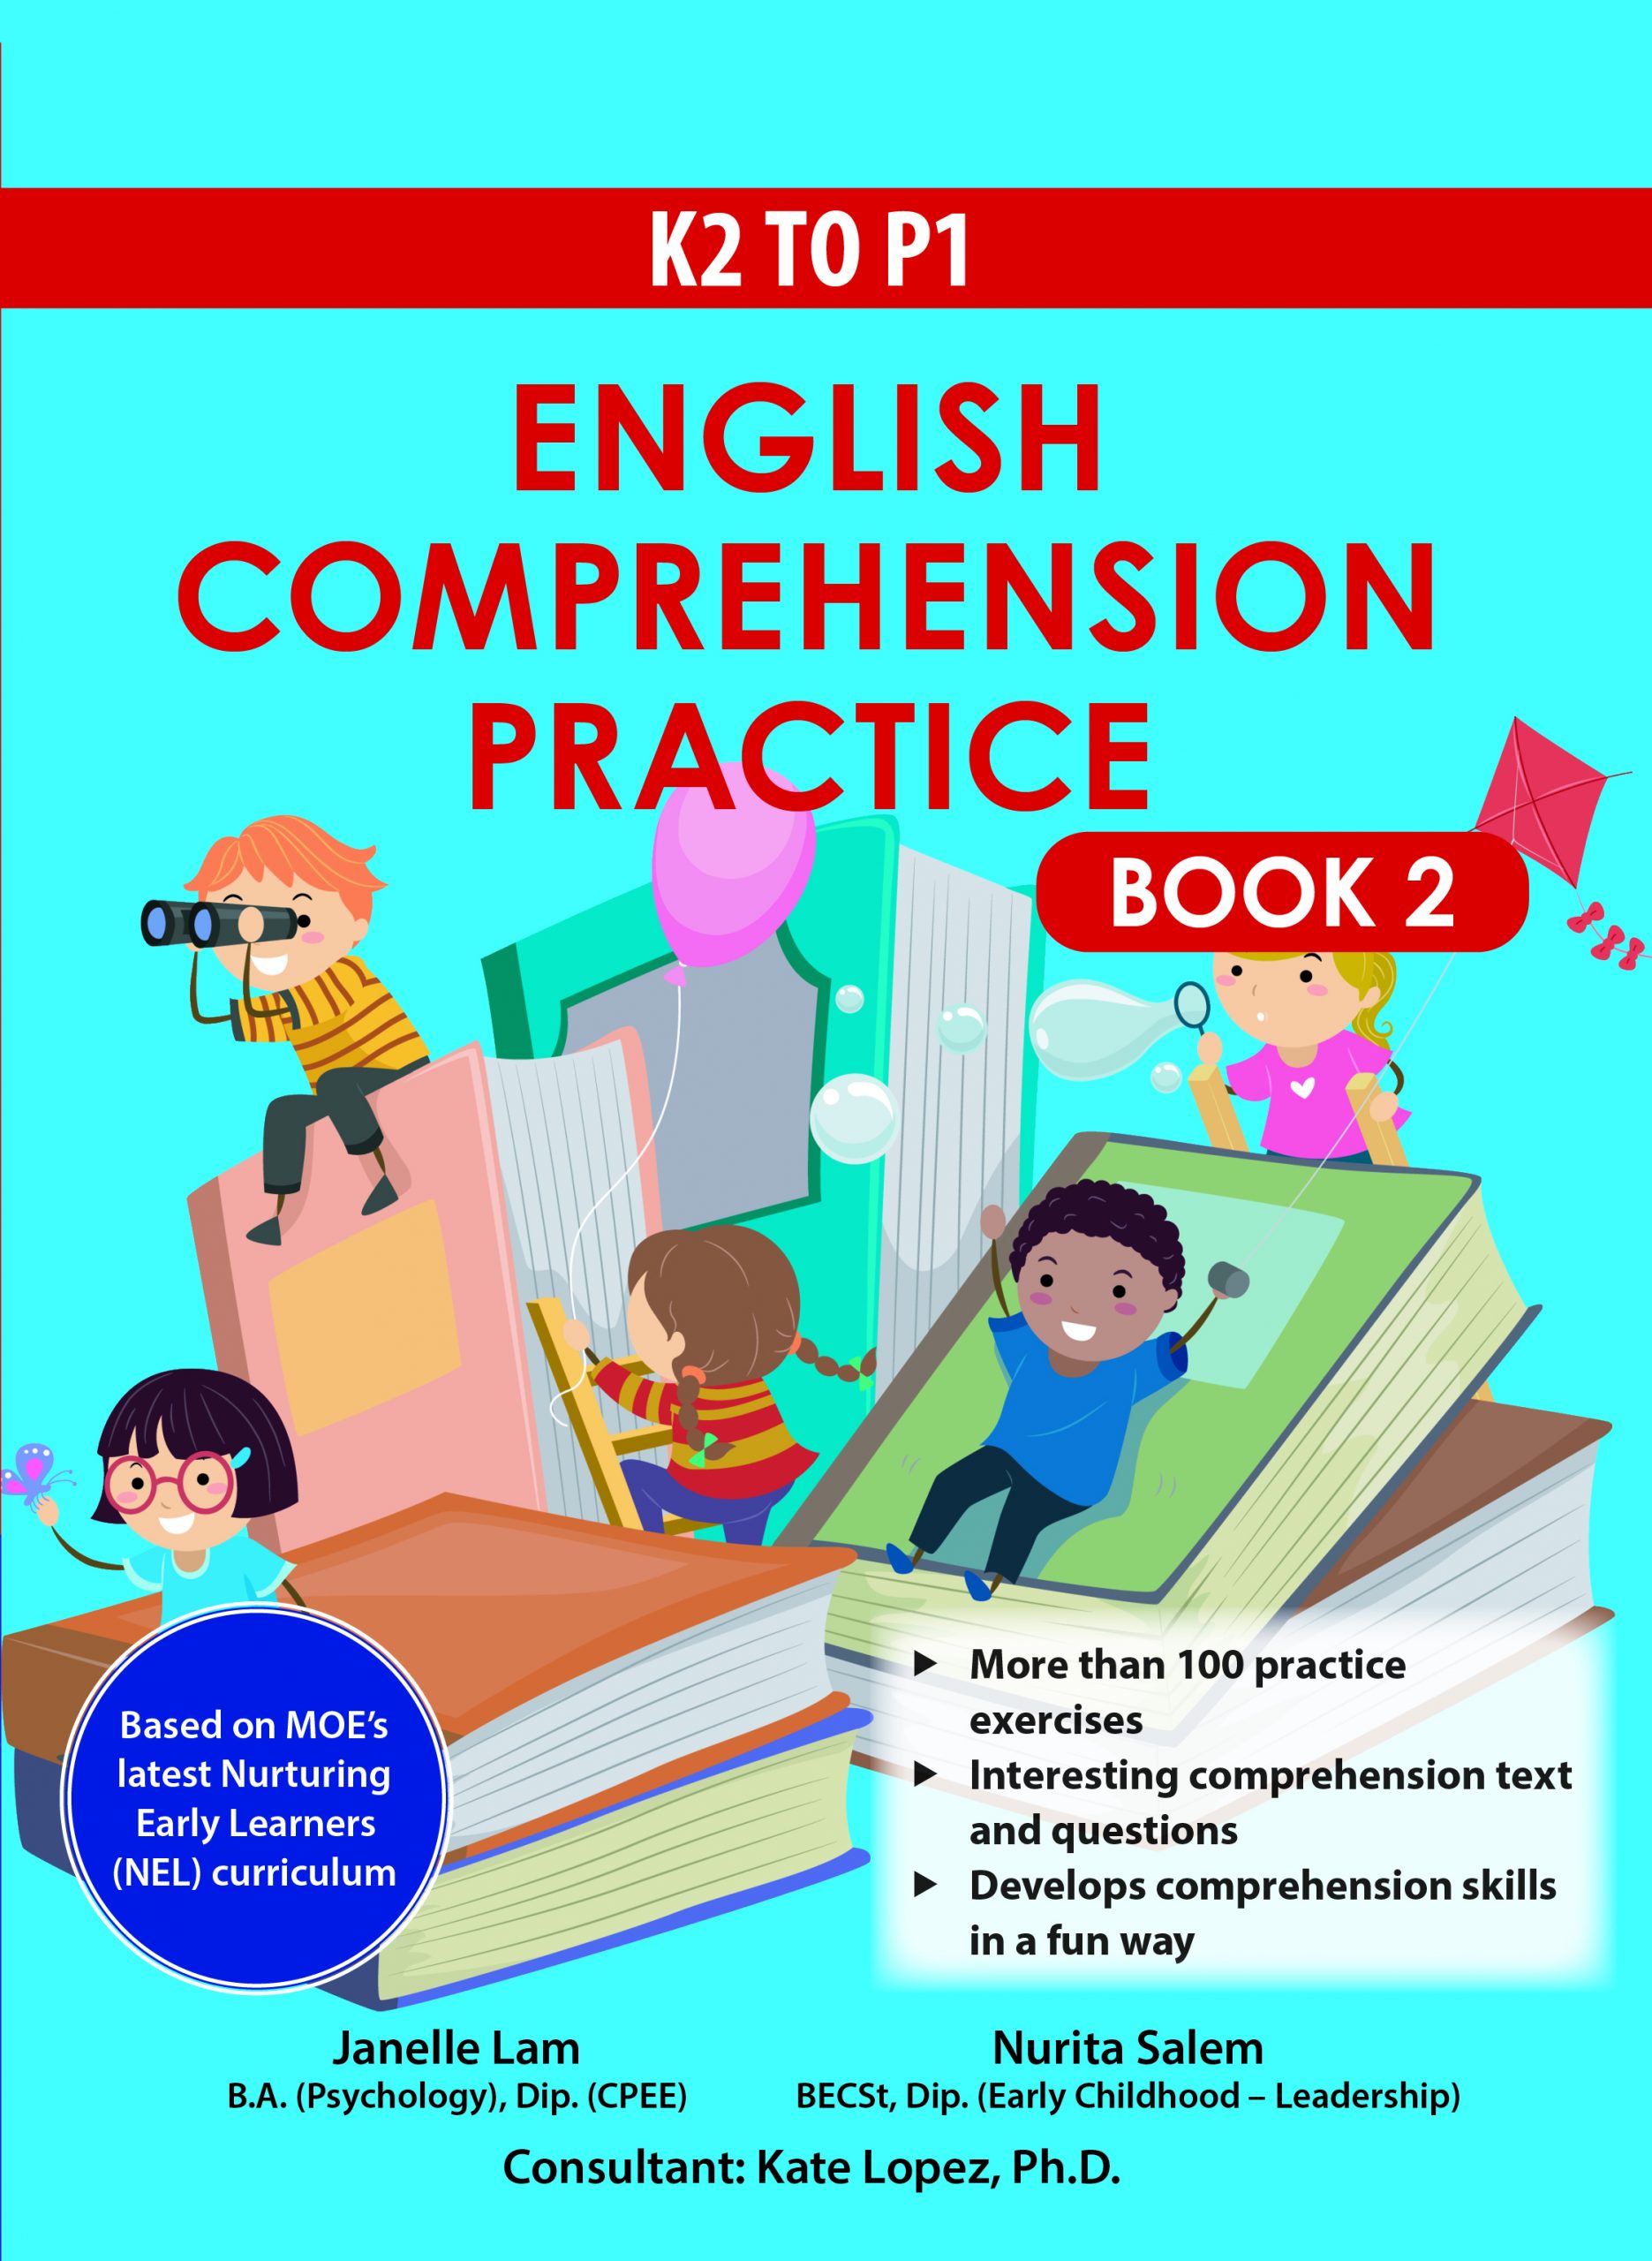 k2-to-p1-english-comprehension-practice-book-2-cpd-singapore